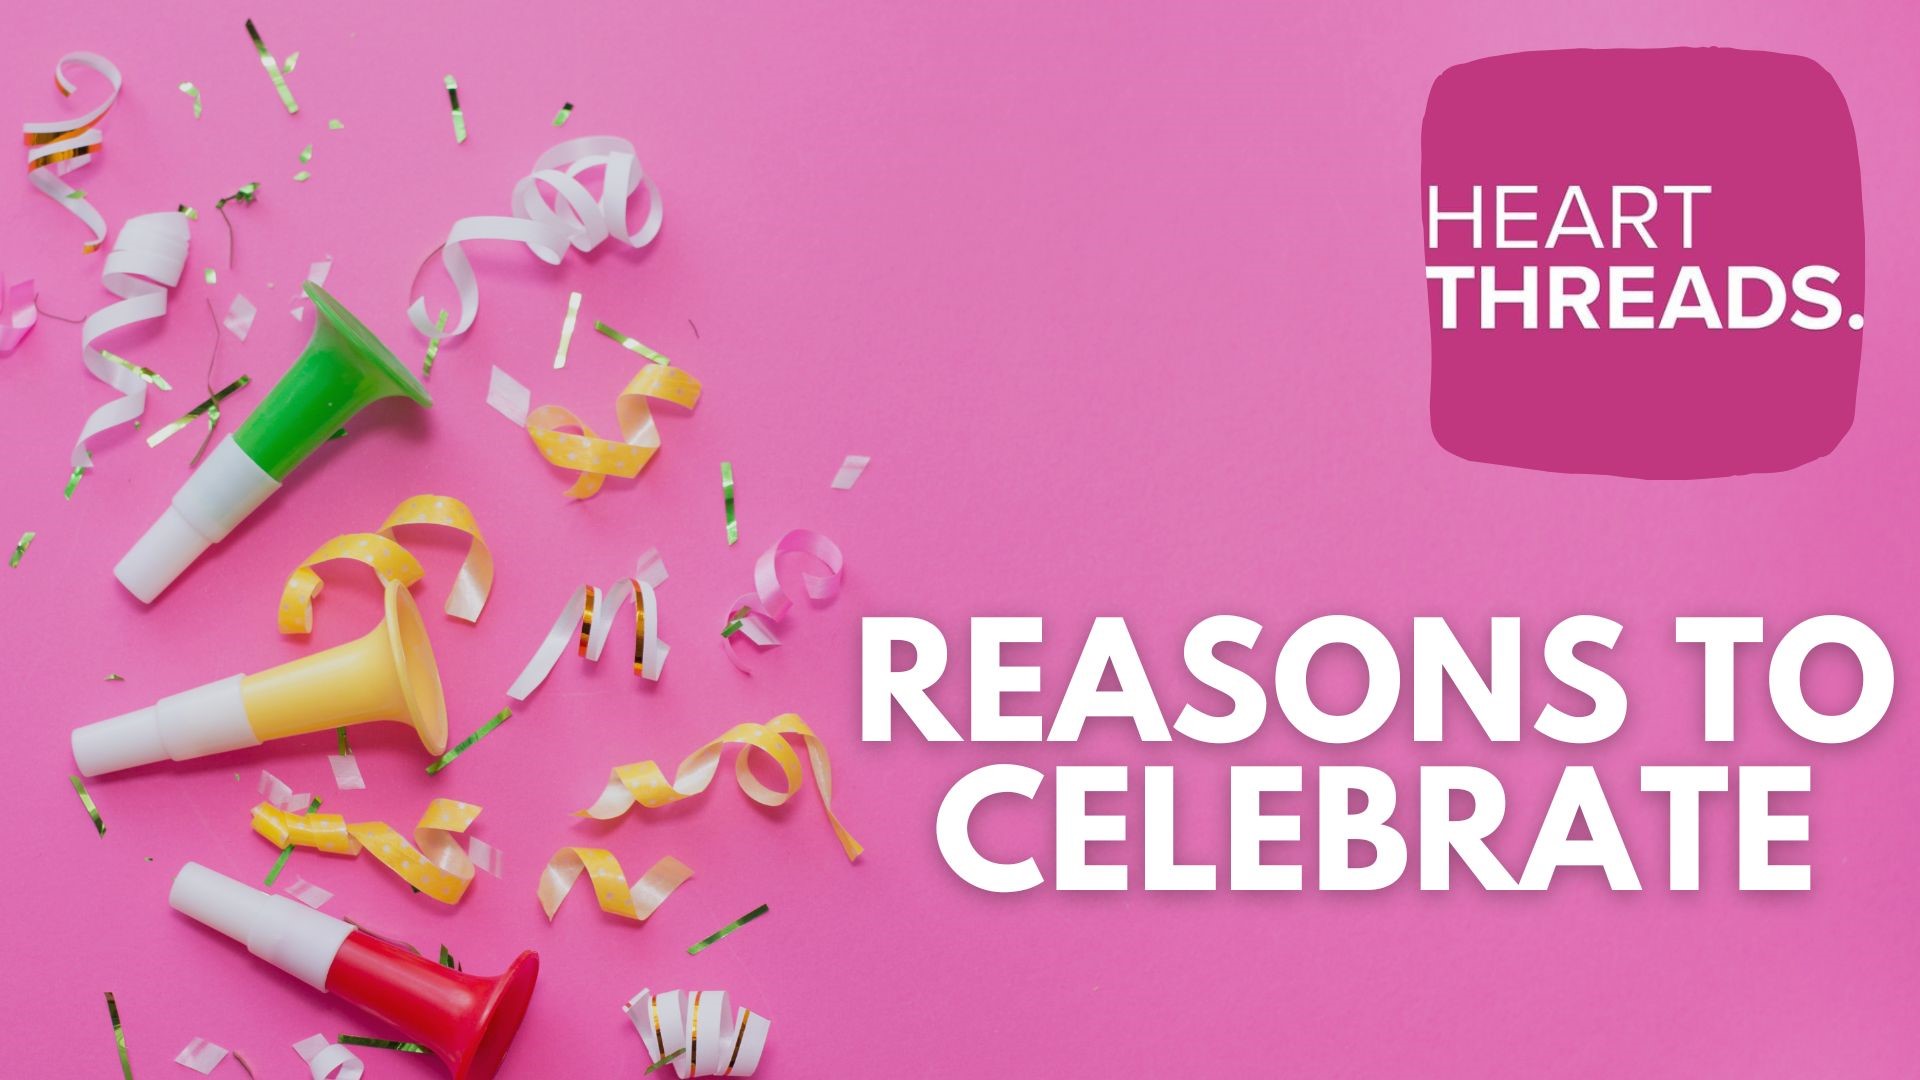 A collection of stories giving us all a reason to celebrate. From 103rd birthdays to going viral on TikTok these heartwarming stories will make you smile.